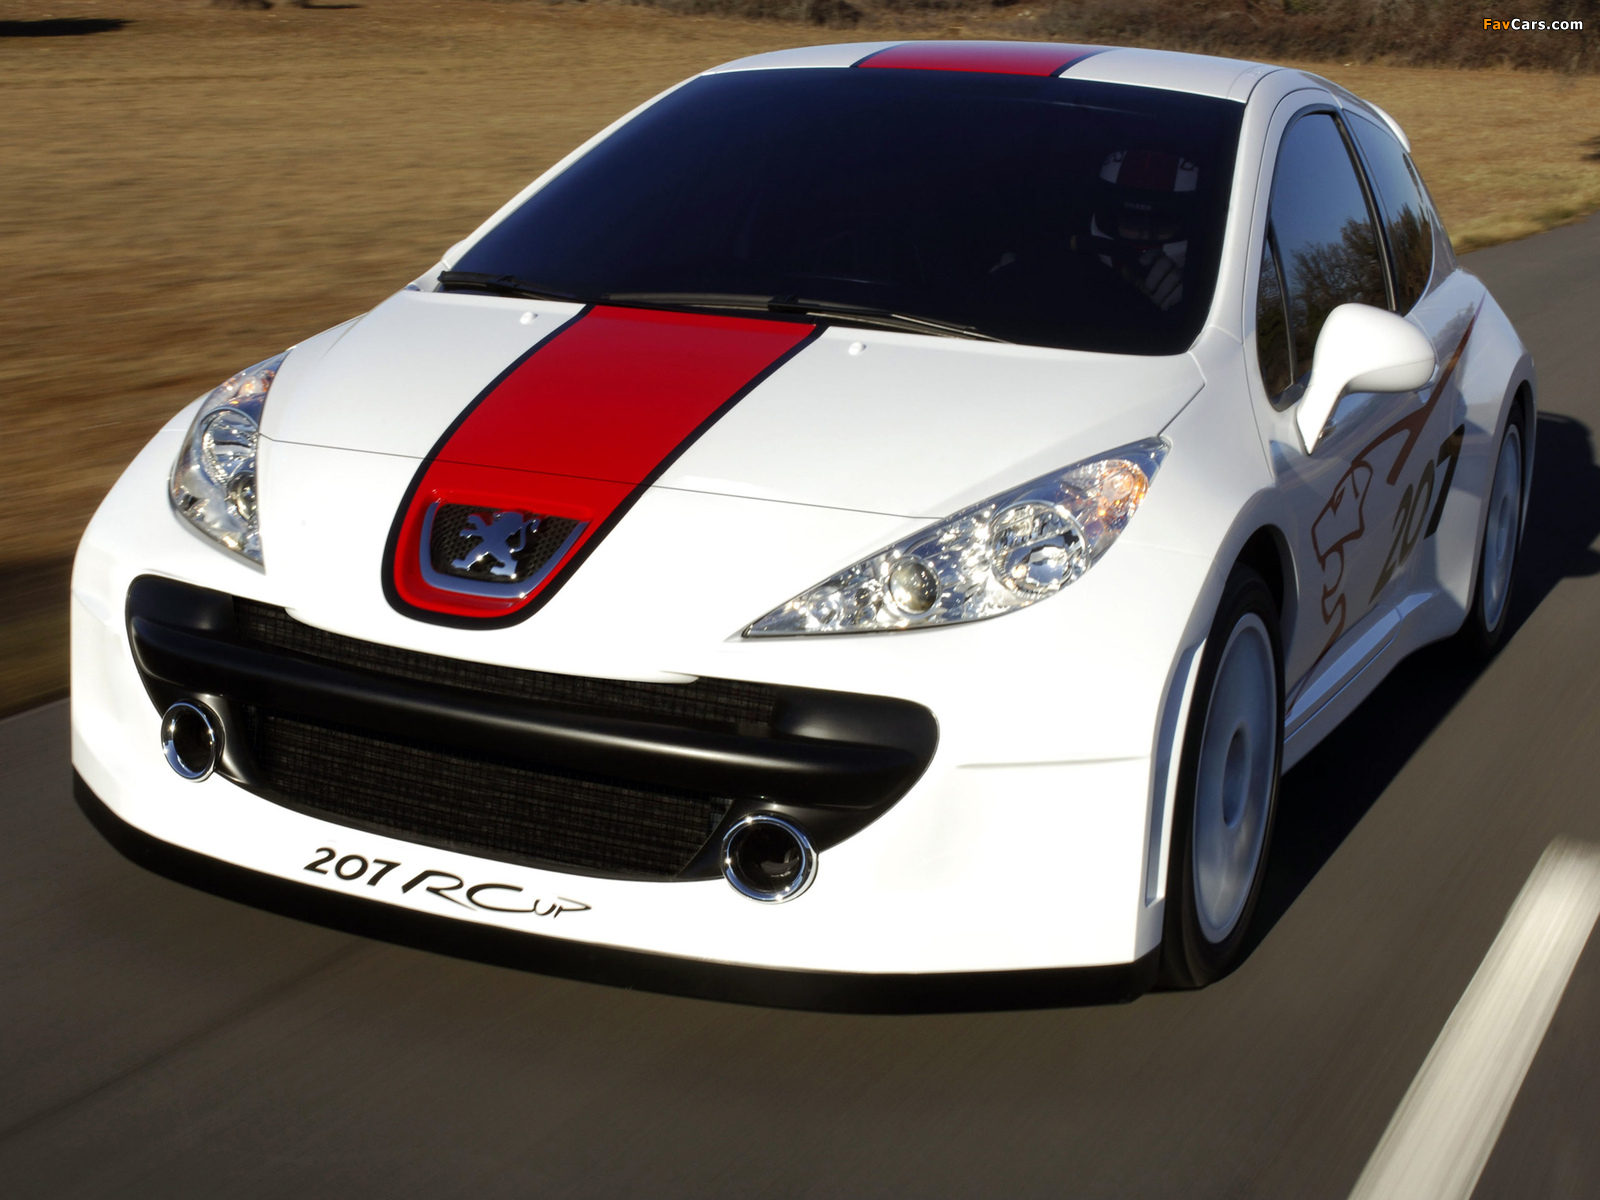 Peugeot 207 RCup Concept 2006 wallpapers (1600 x 1200)